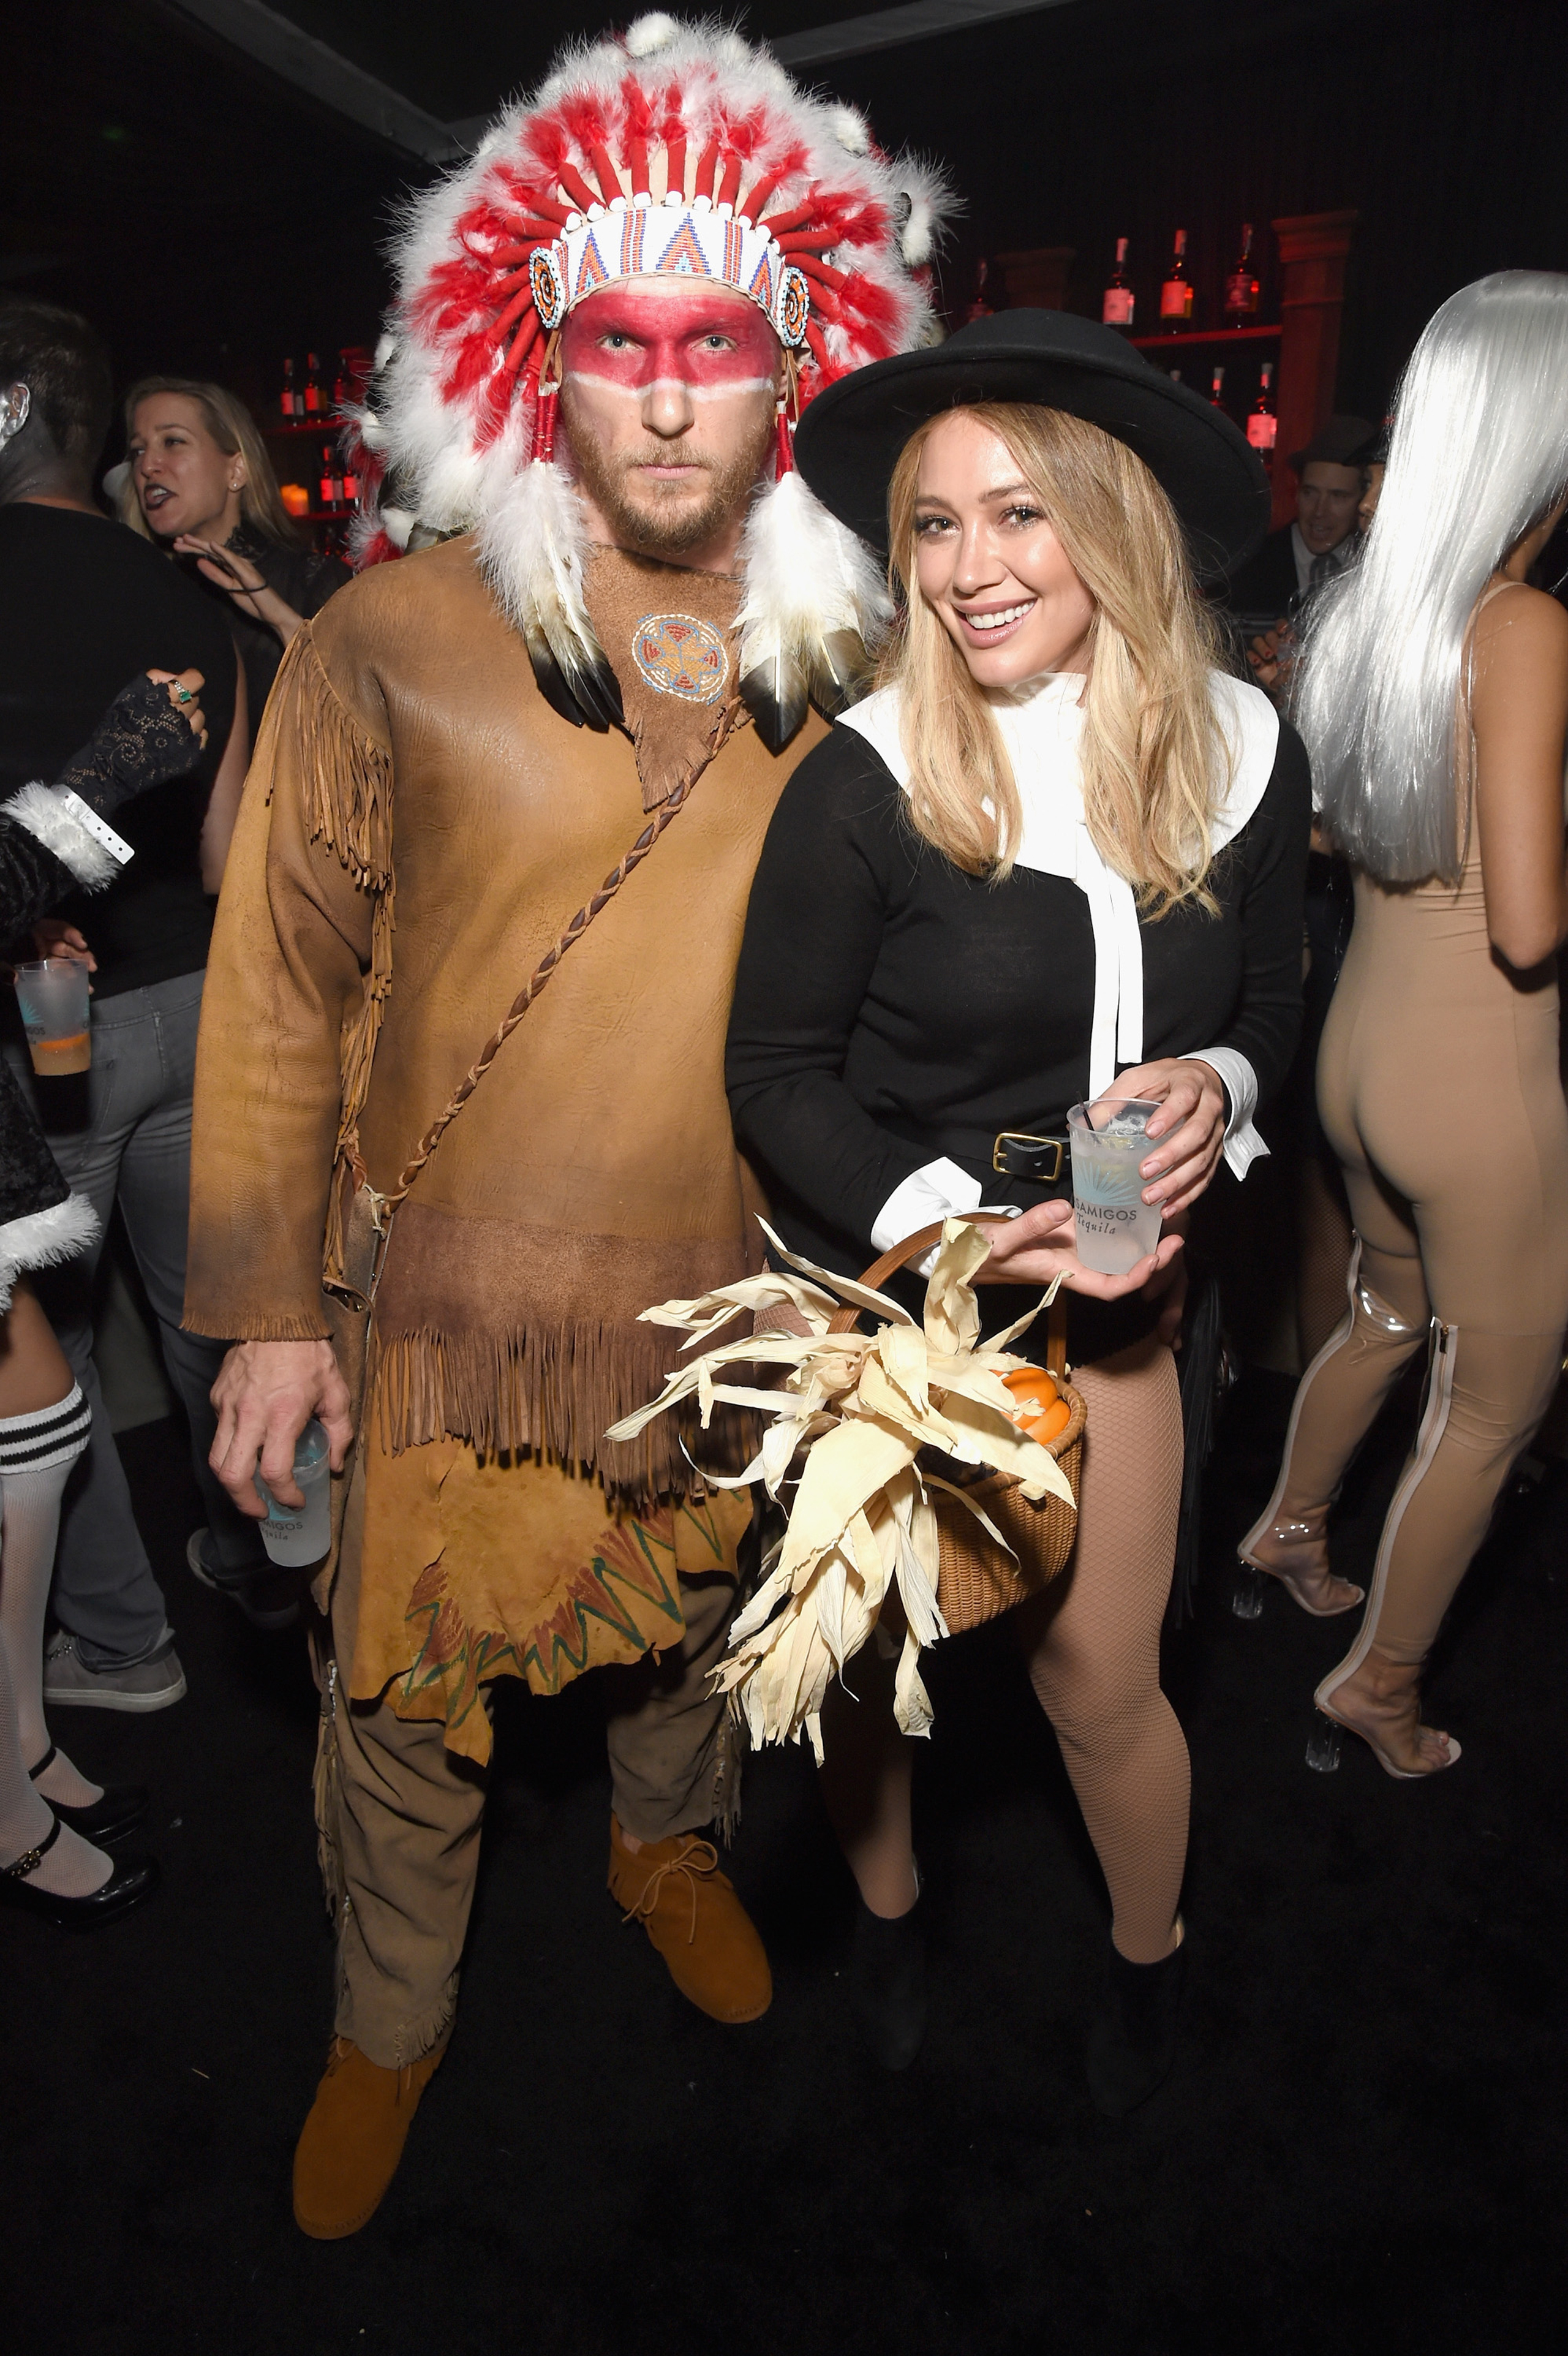 Hilary Duff and Jason Walsh attend the Casamigos Halloween Party at a private residence in Beverly Hills, California, on Oct. 28, 2016. (Michael Kovac—Getty Images for Casamigos Tequi)